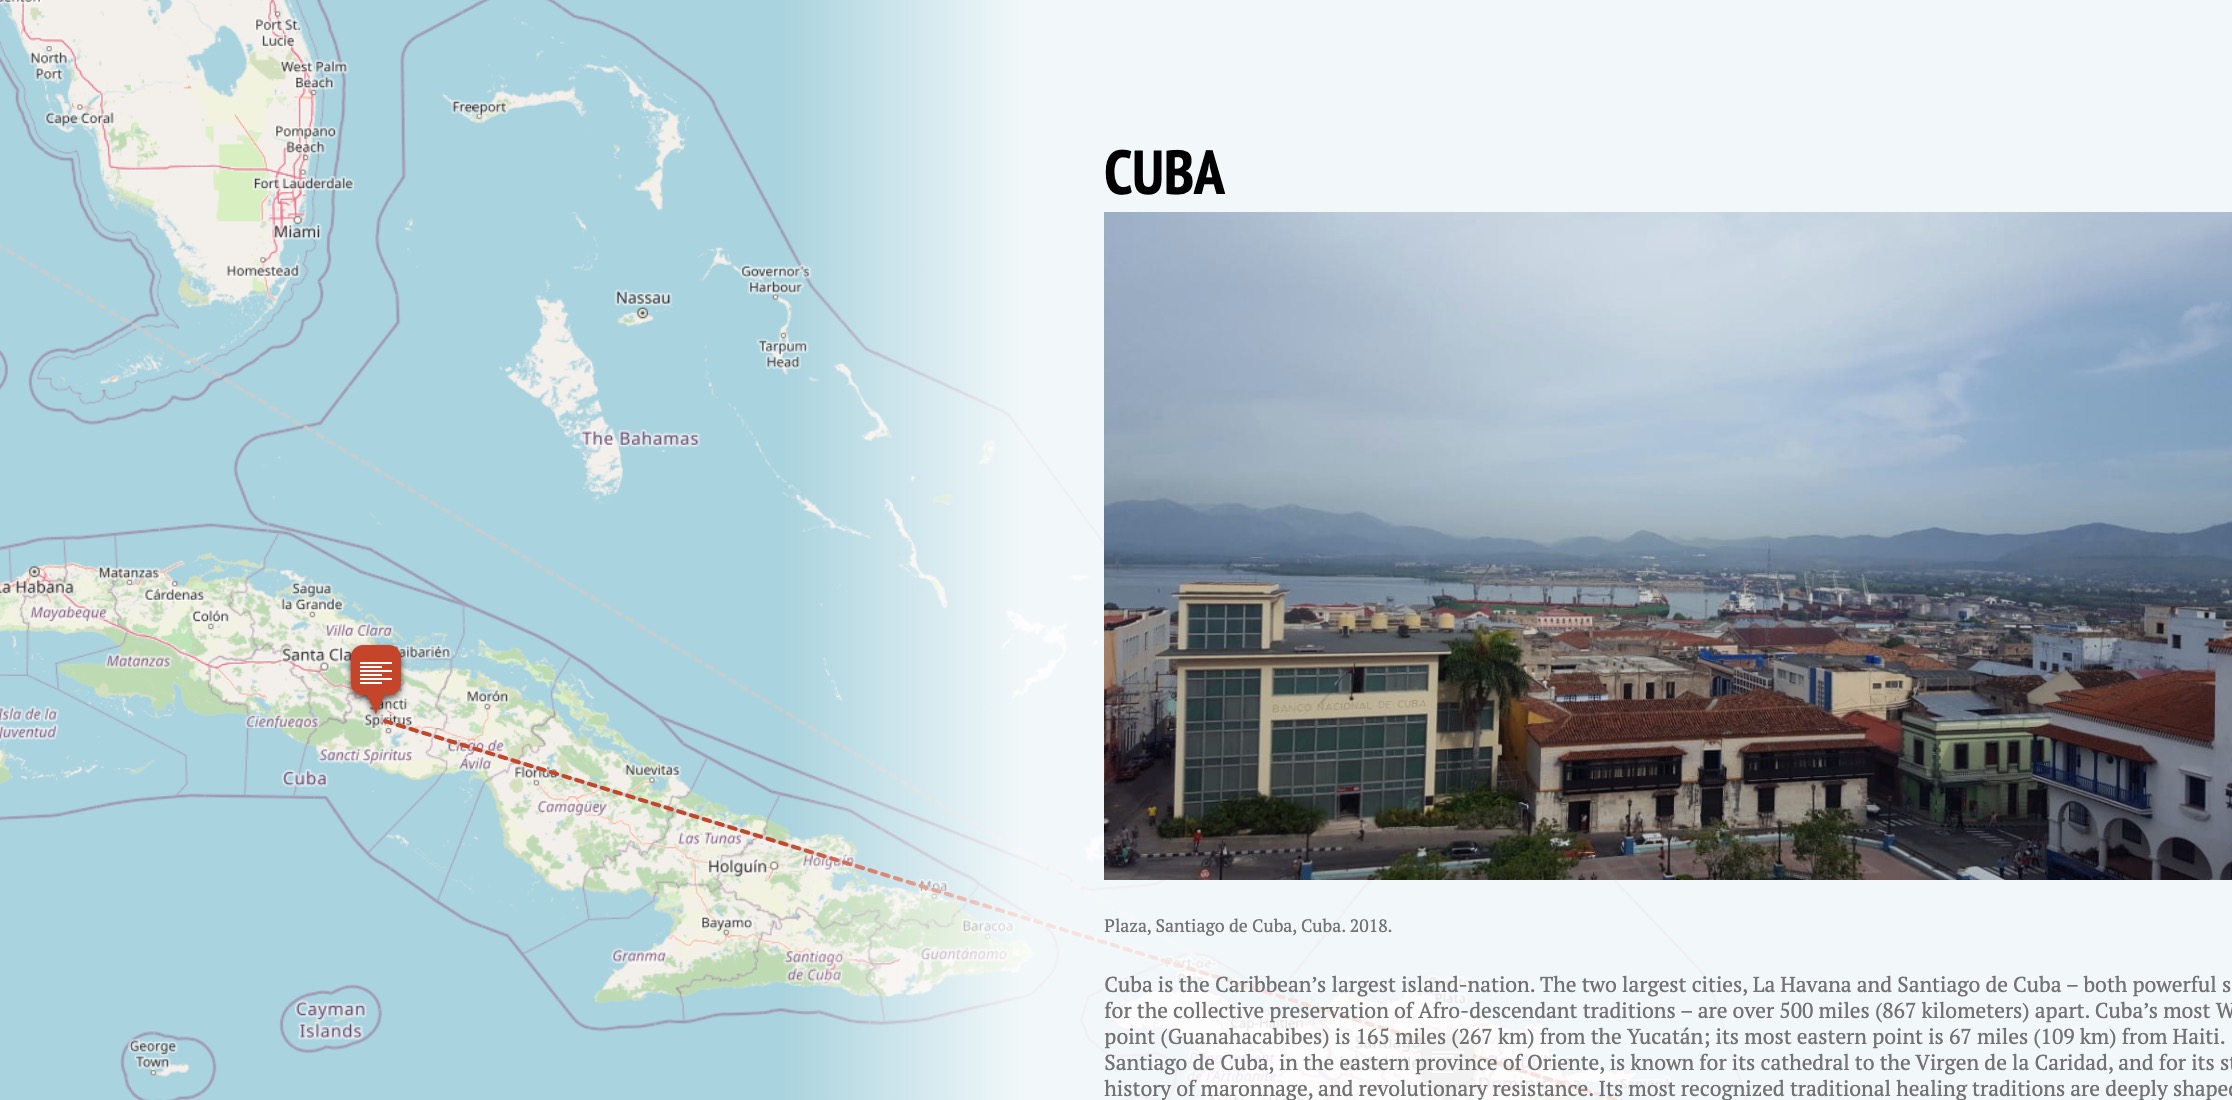 Screenshot of a map of Cuba. On the right side is an image of Cuba with writing describing Cuba